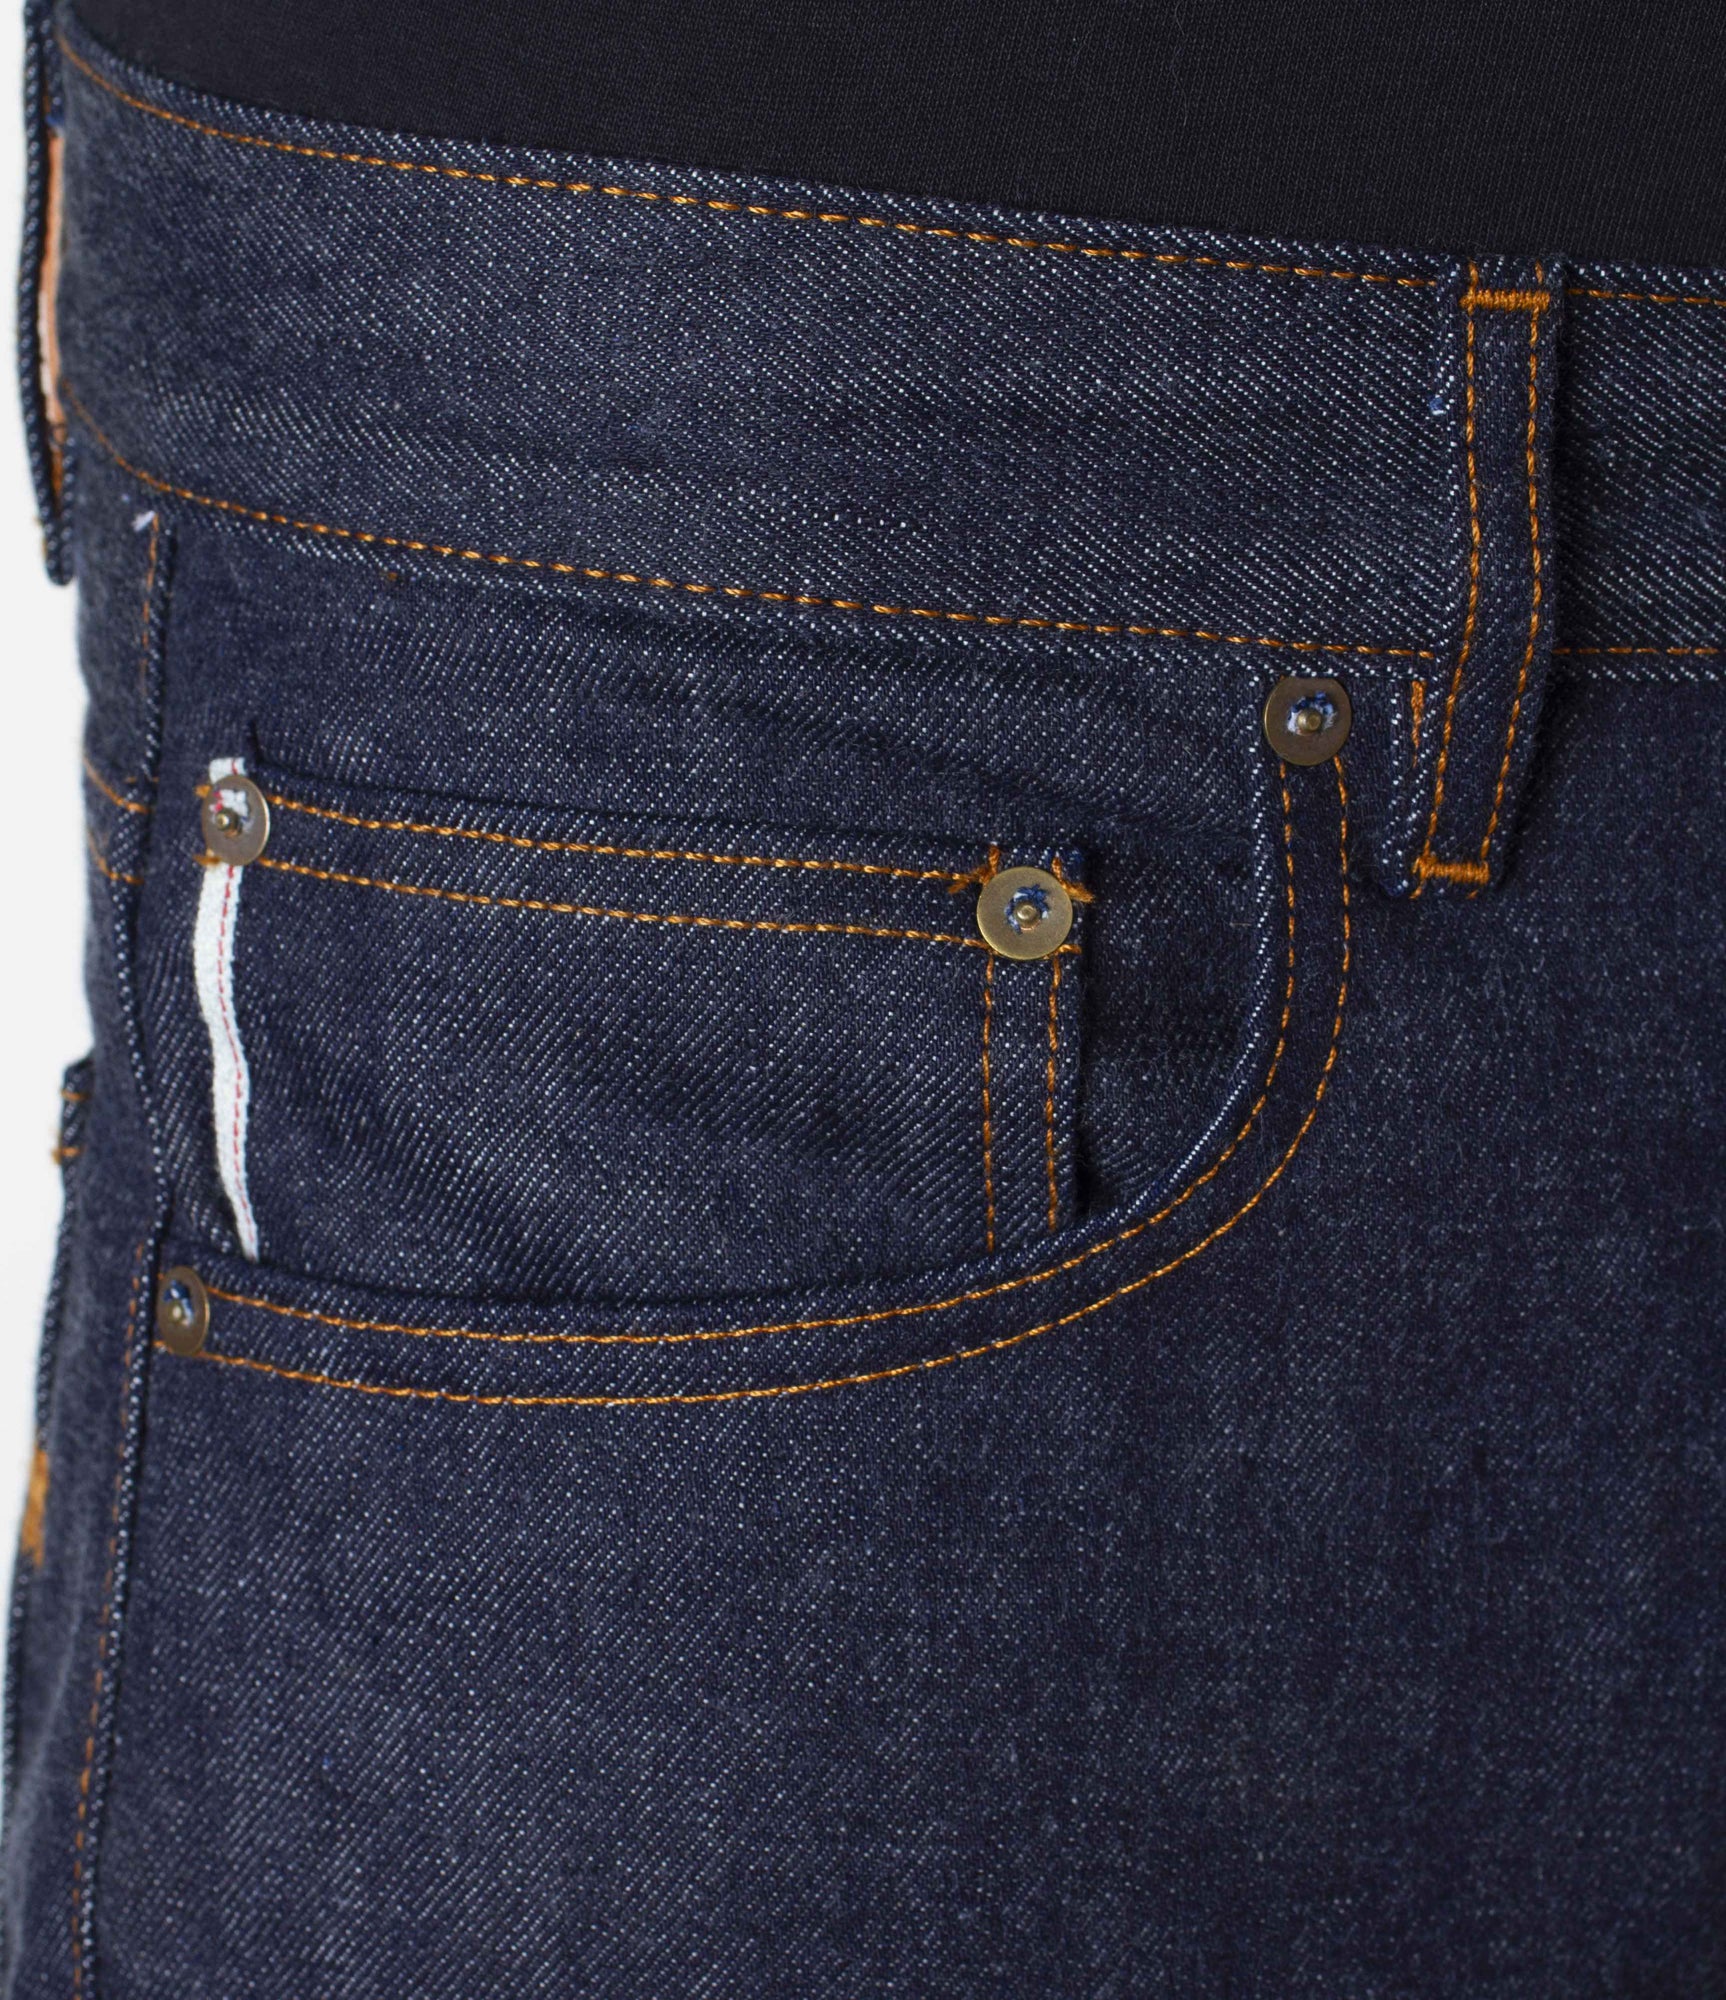 $68 Cone Mills Selvage - Brave Star Selvage